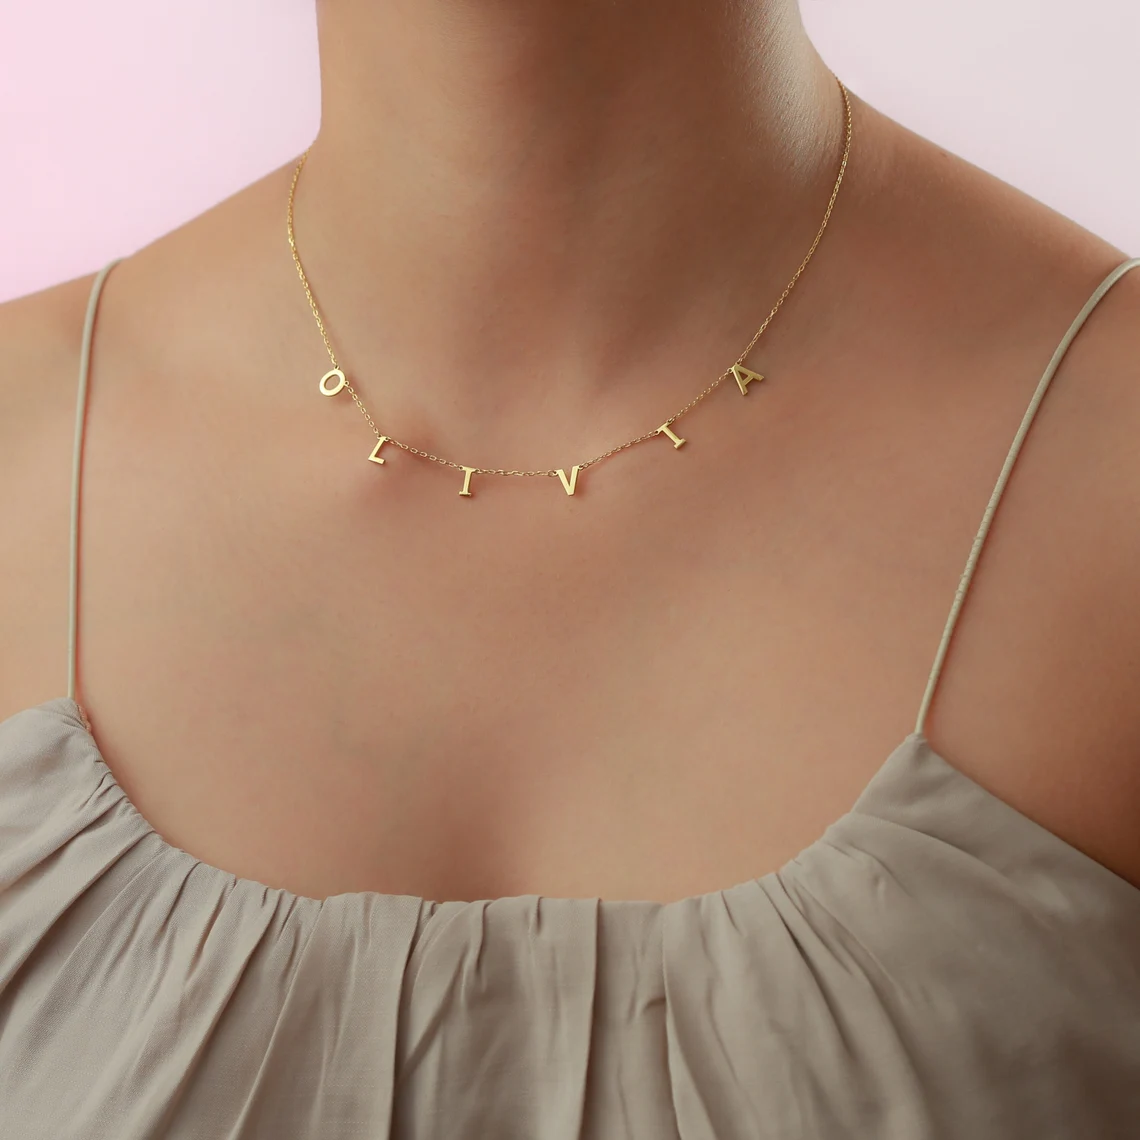 Personalized Letter Name Nacklace Gold Plated Dainty Necklace